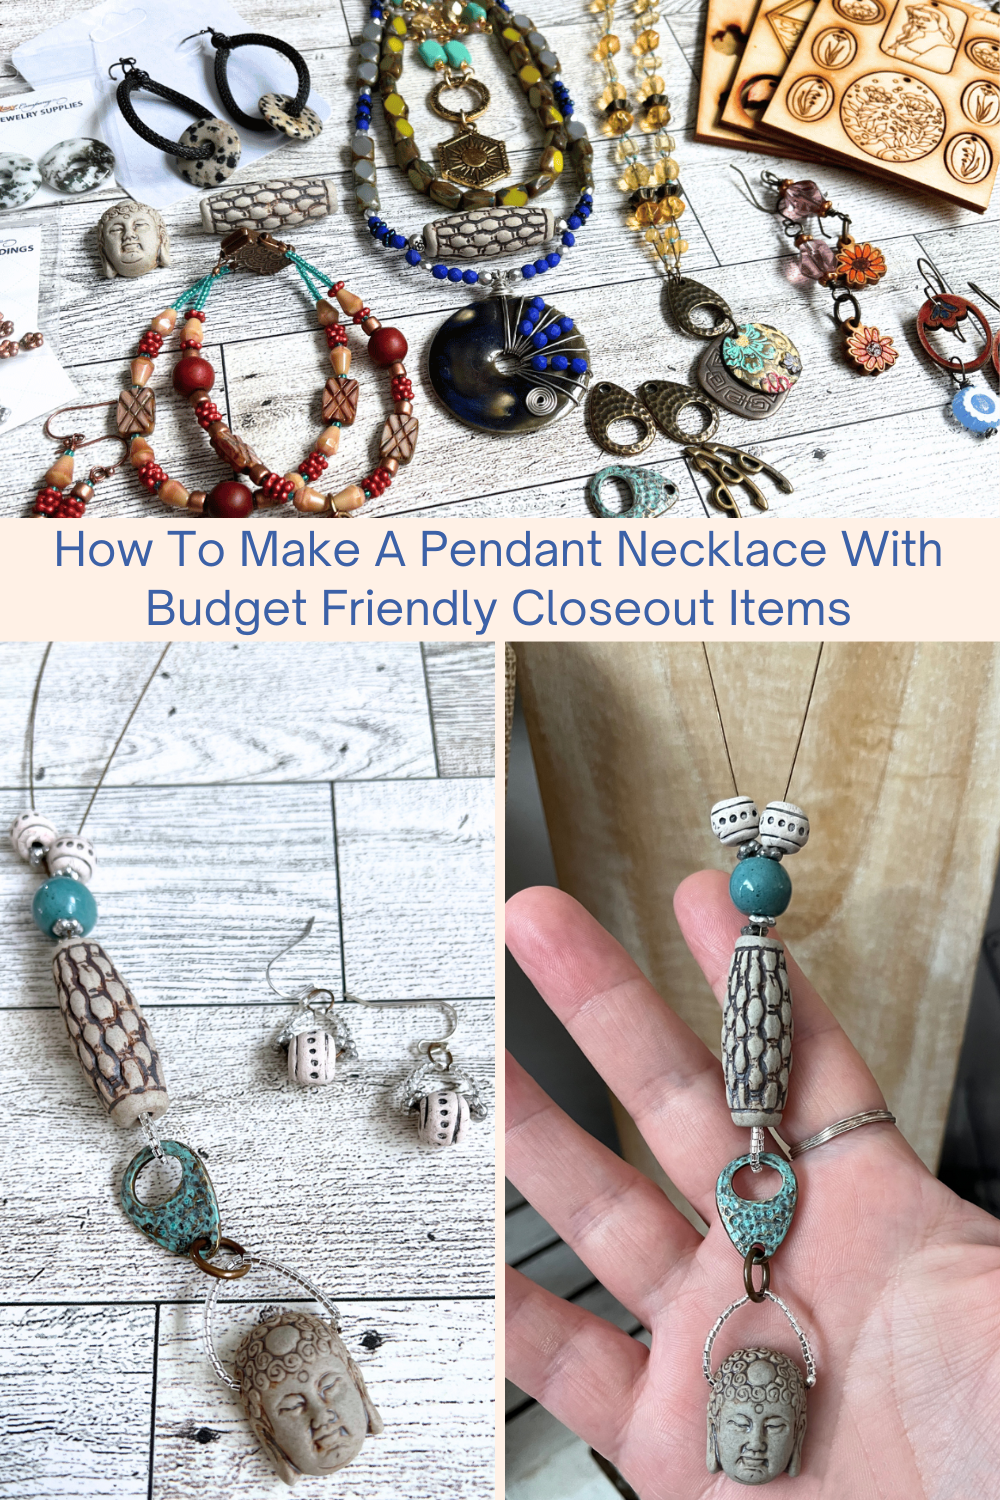 How To Make A Pendant Necklace With Budget Friendly Closeout Items